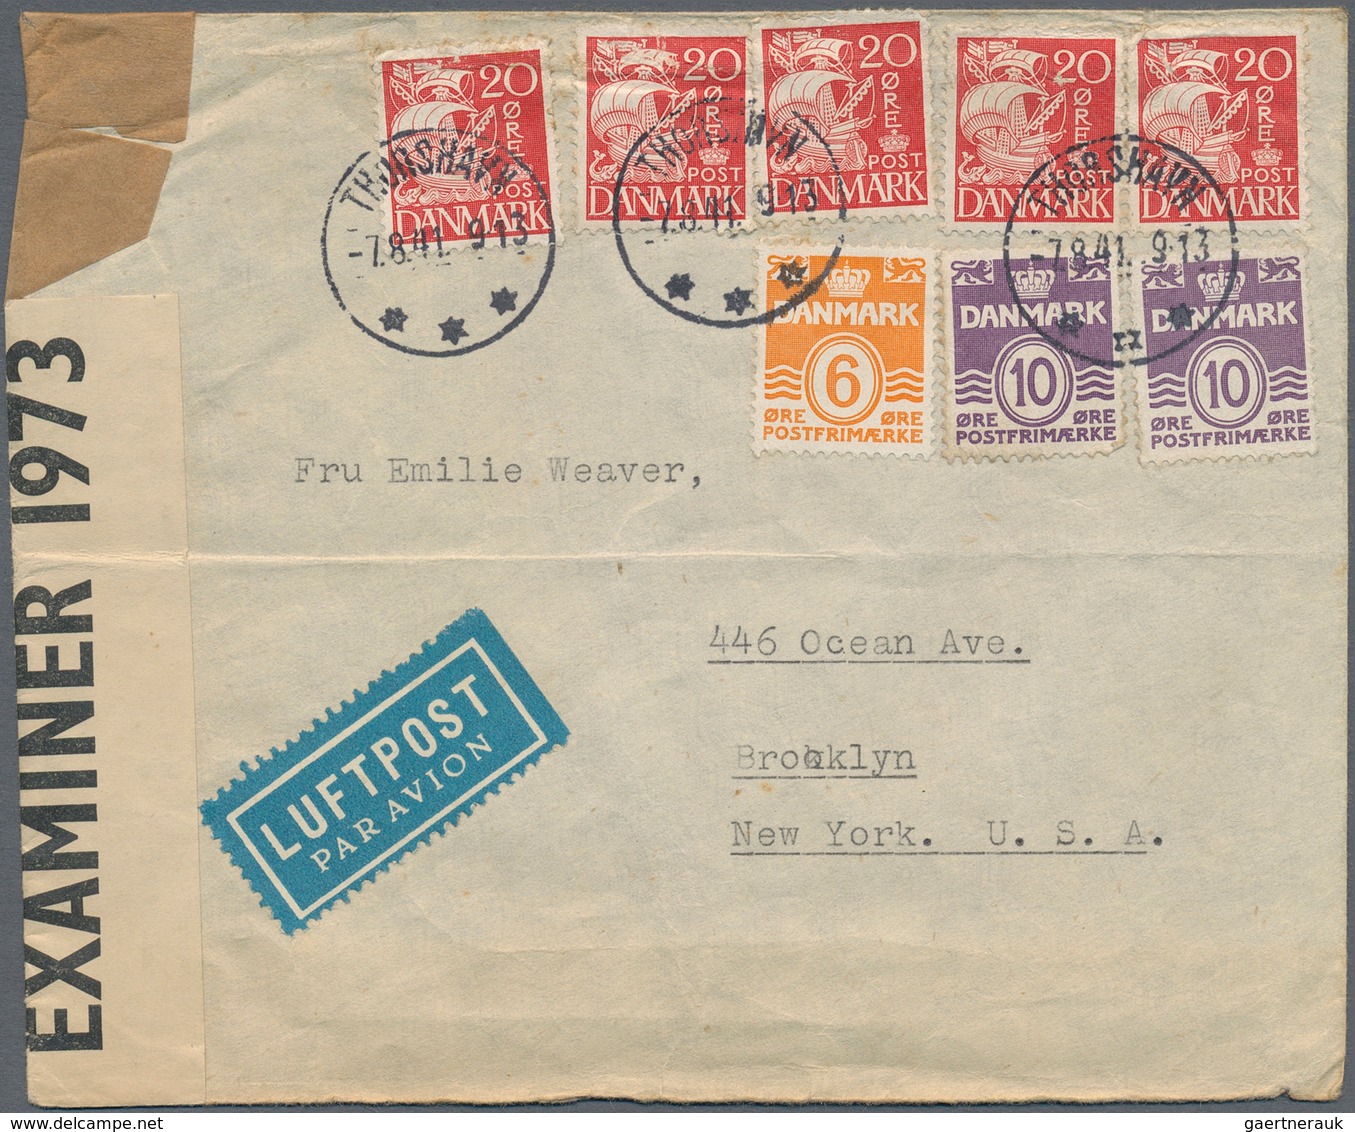 Dänemark: 1860-1939: Ten Covers And Postal Stationery Cards From Denmark, Faroe Islands, Greenland A - Covers & Documents